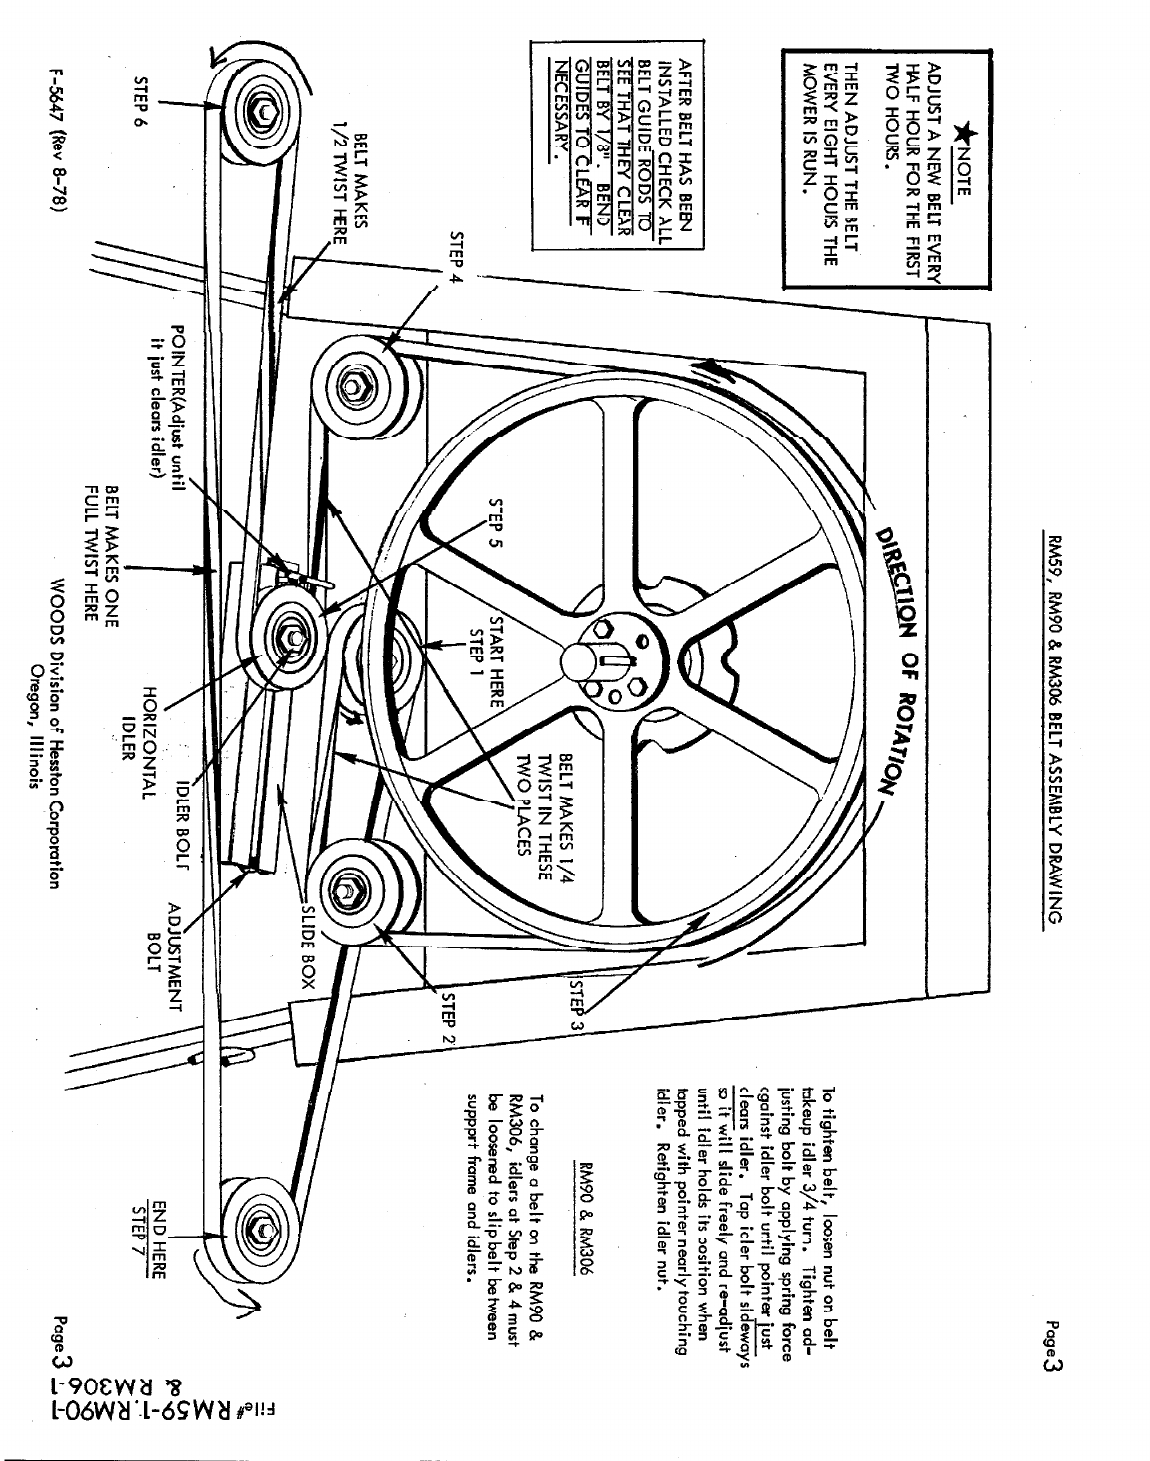 Woods Mower Parts Diagrams Woods Rm59 1 Owners Manual